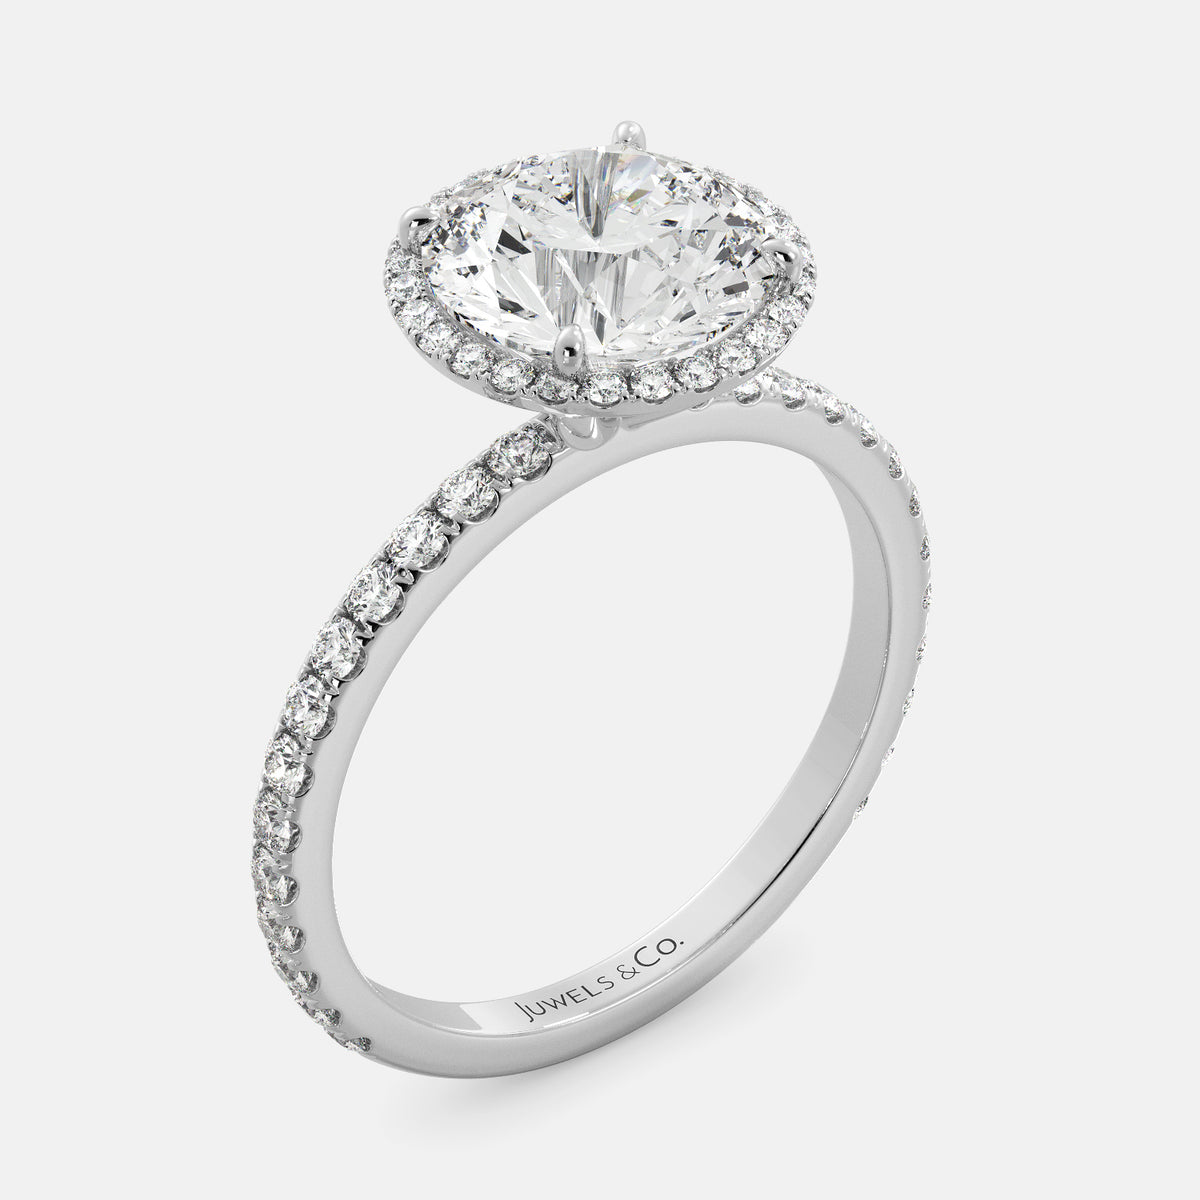 This image shows a beautiful round halo lab-diamond ring with pavé on a white gold band. The ring features a round brilliant-cut lab diamond in the center, surrounded by a halo of smaller diamonds. The band is pavé-set with smaller diamonds, creating a sparkling and elegant look. The ring is made of 14k white gold and is available in a variety of sizes.